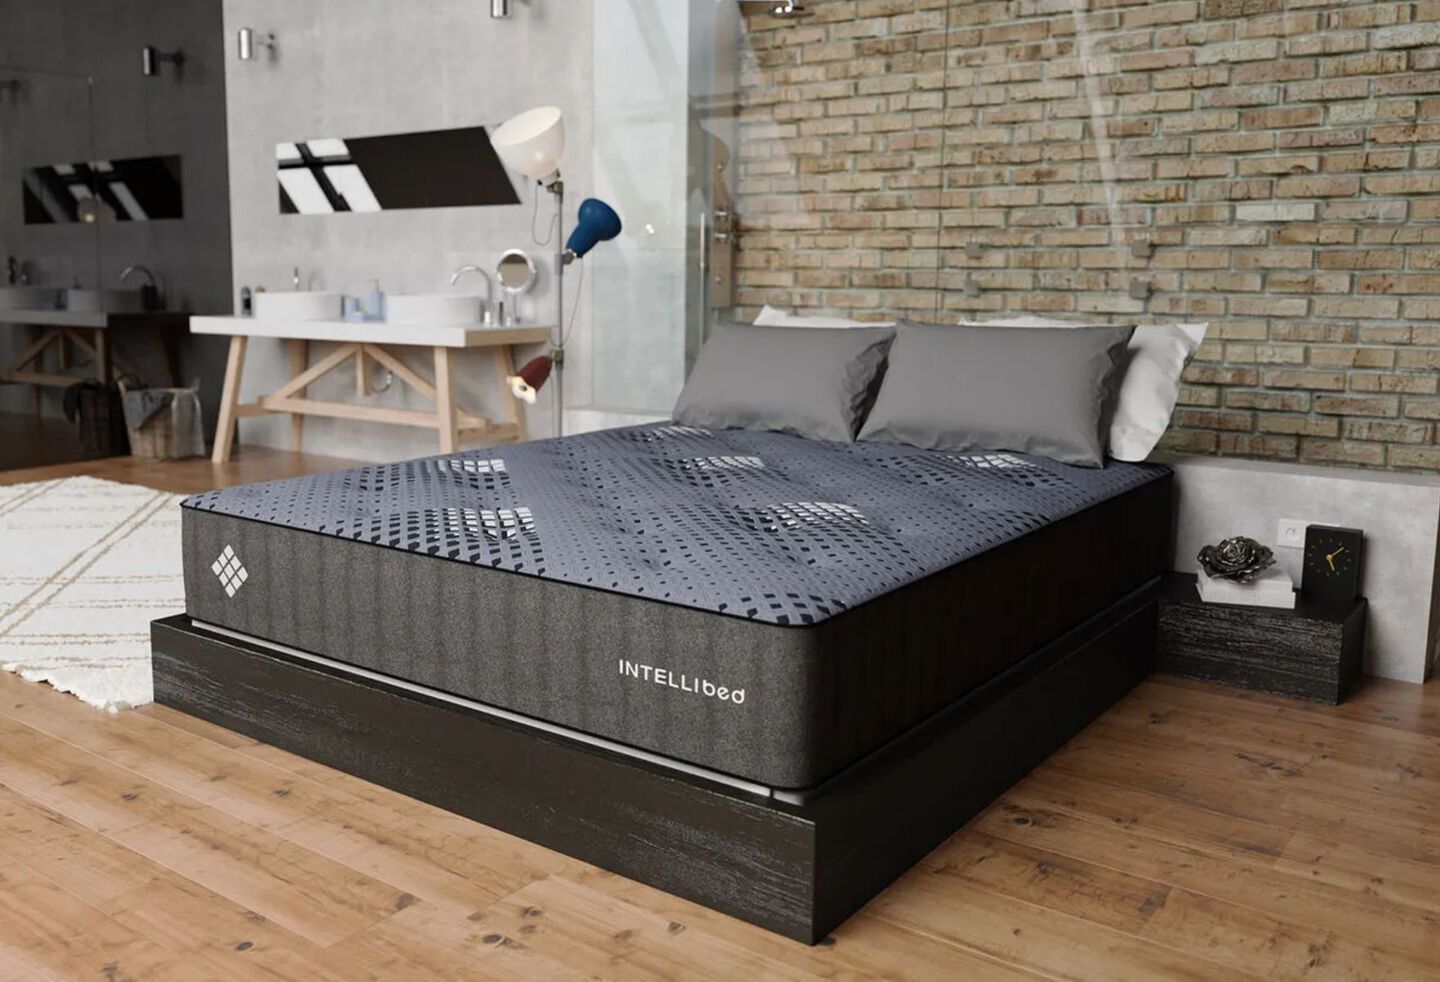 Navy blue Intellibed mattress on a black wooden bedframe in a bedroom